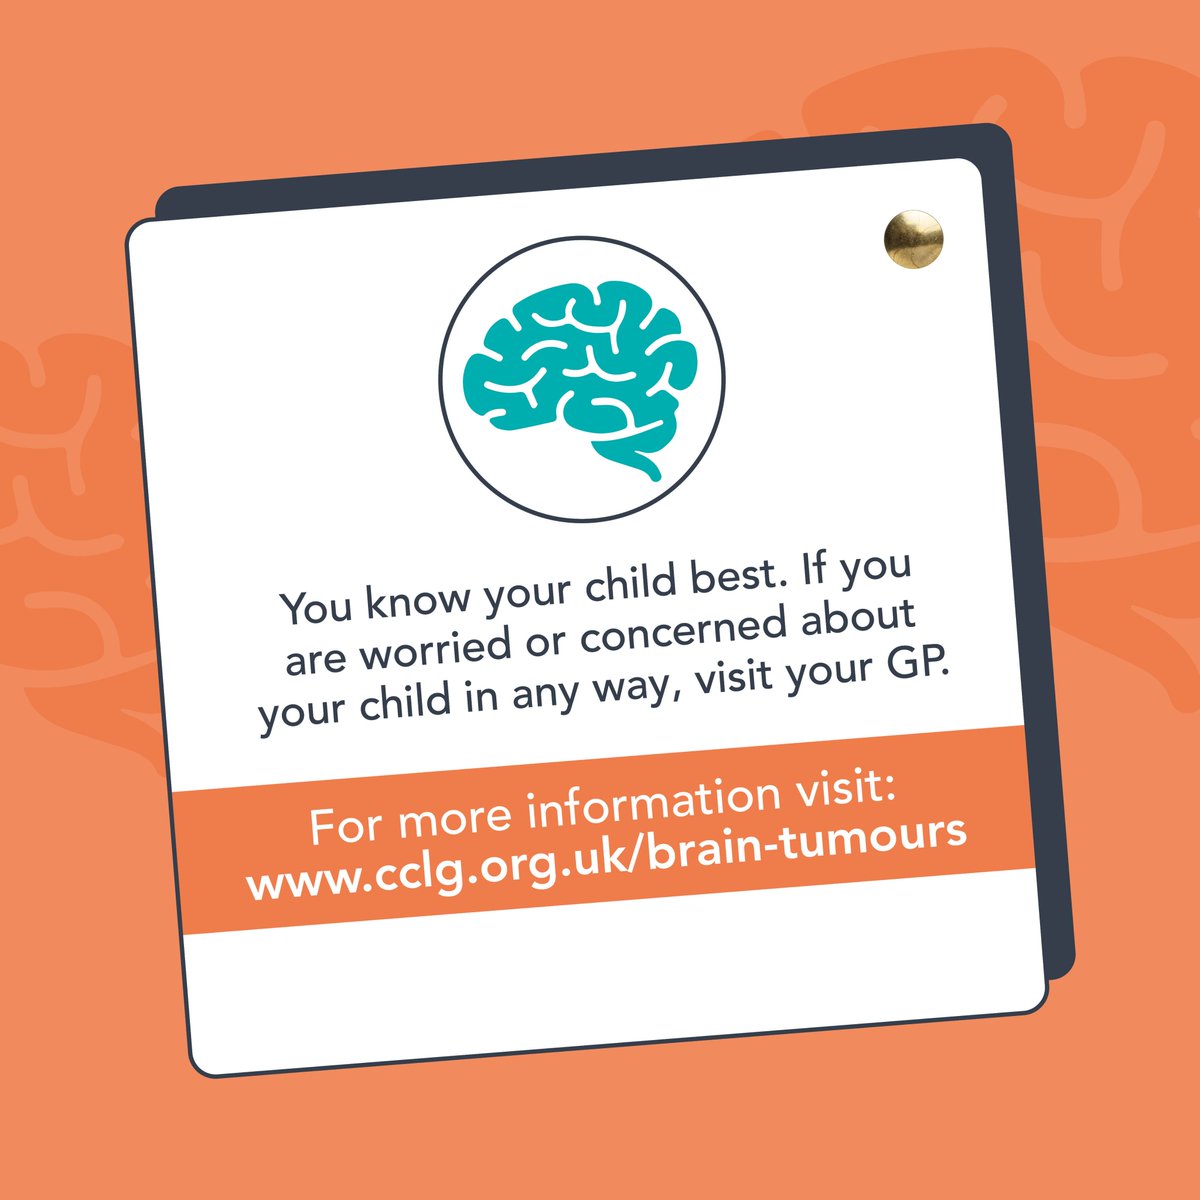 Today marks the start of #BrainTumourAwarenessWeek, and this week we’re raising awareness of childhood brain tumours - sharing the signs and symptoms, patient stories and helpful resources to support families 🩵